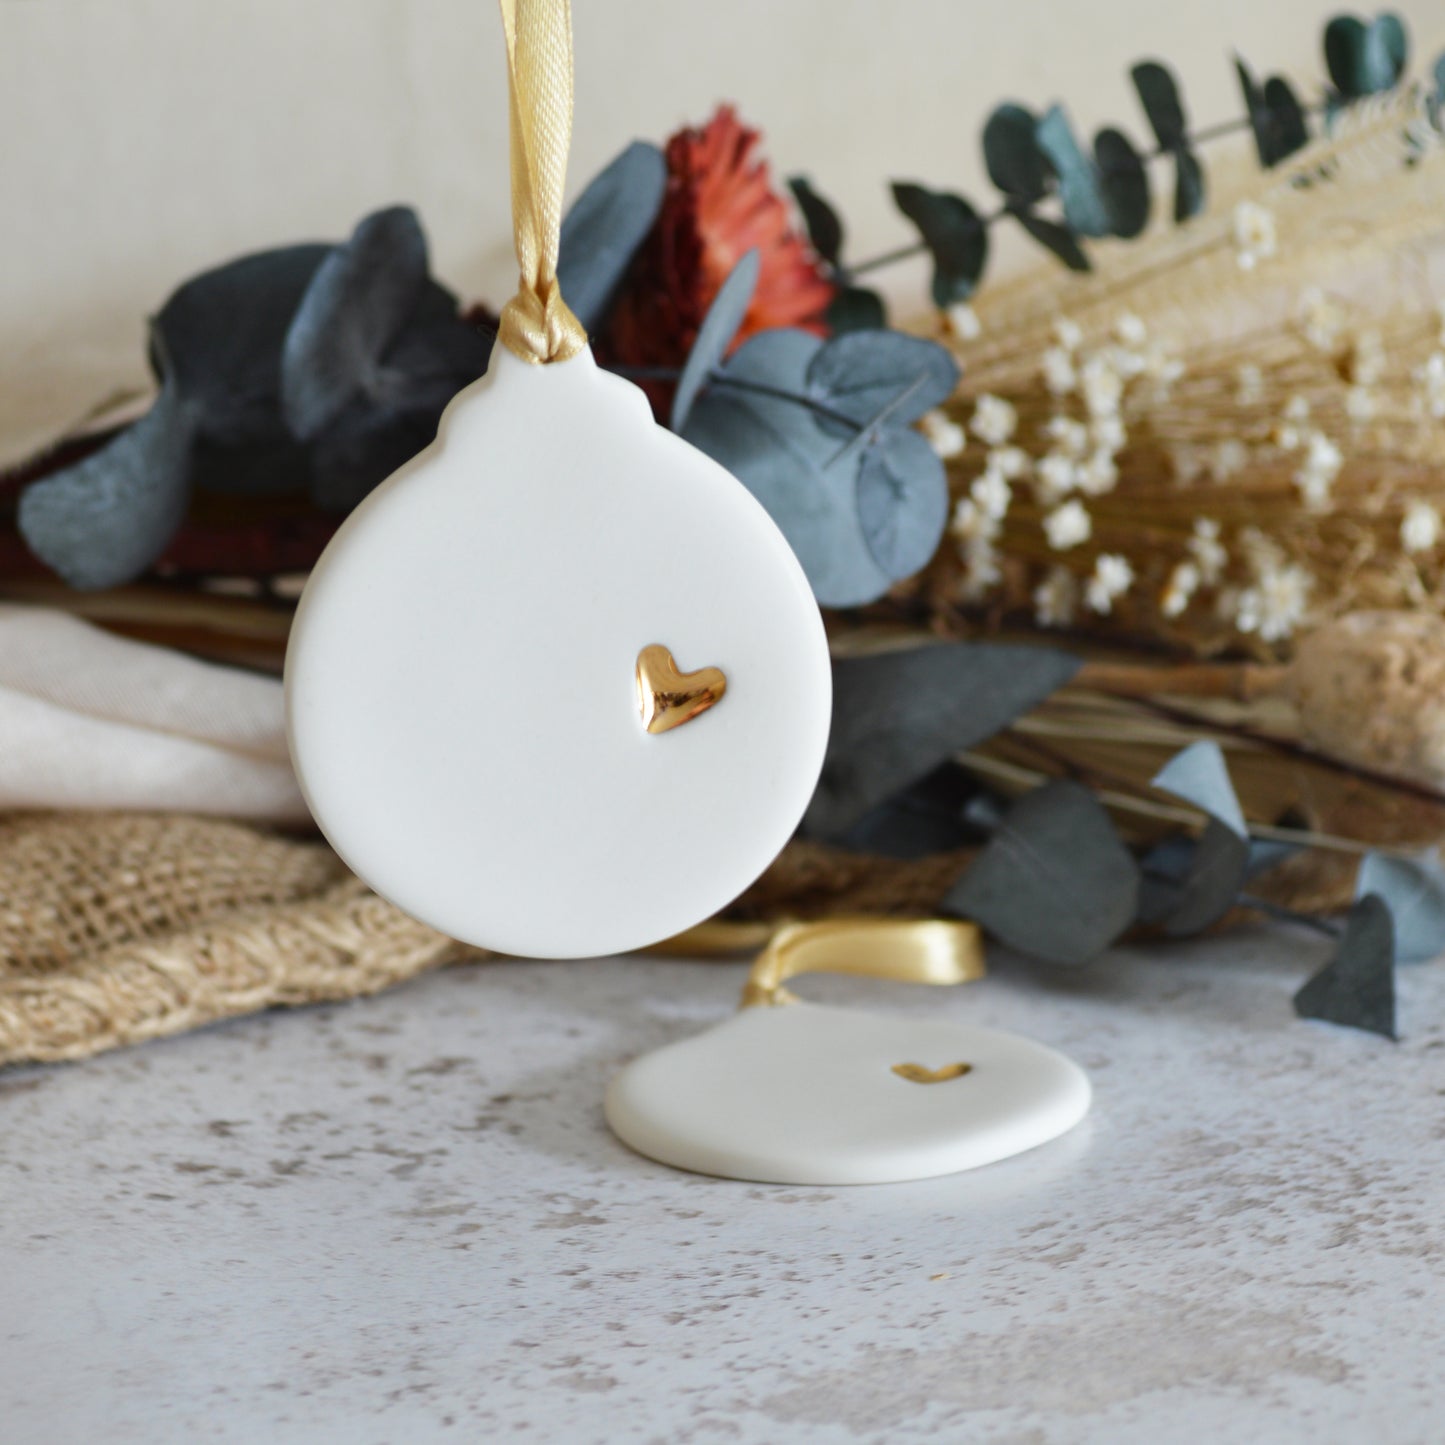 Flat Bauble Hanging Decoration With A Gold Heart | Porcelain | Hanging Christmas Decorations | Christmas Tree Decor